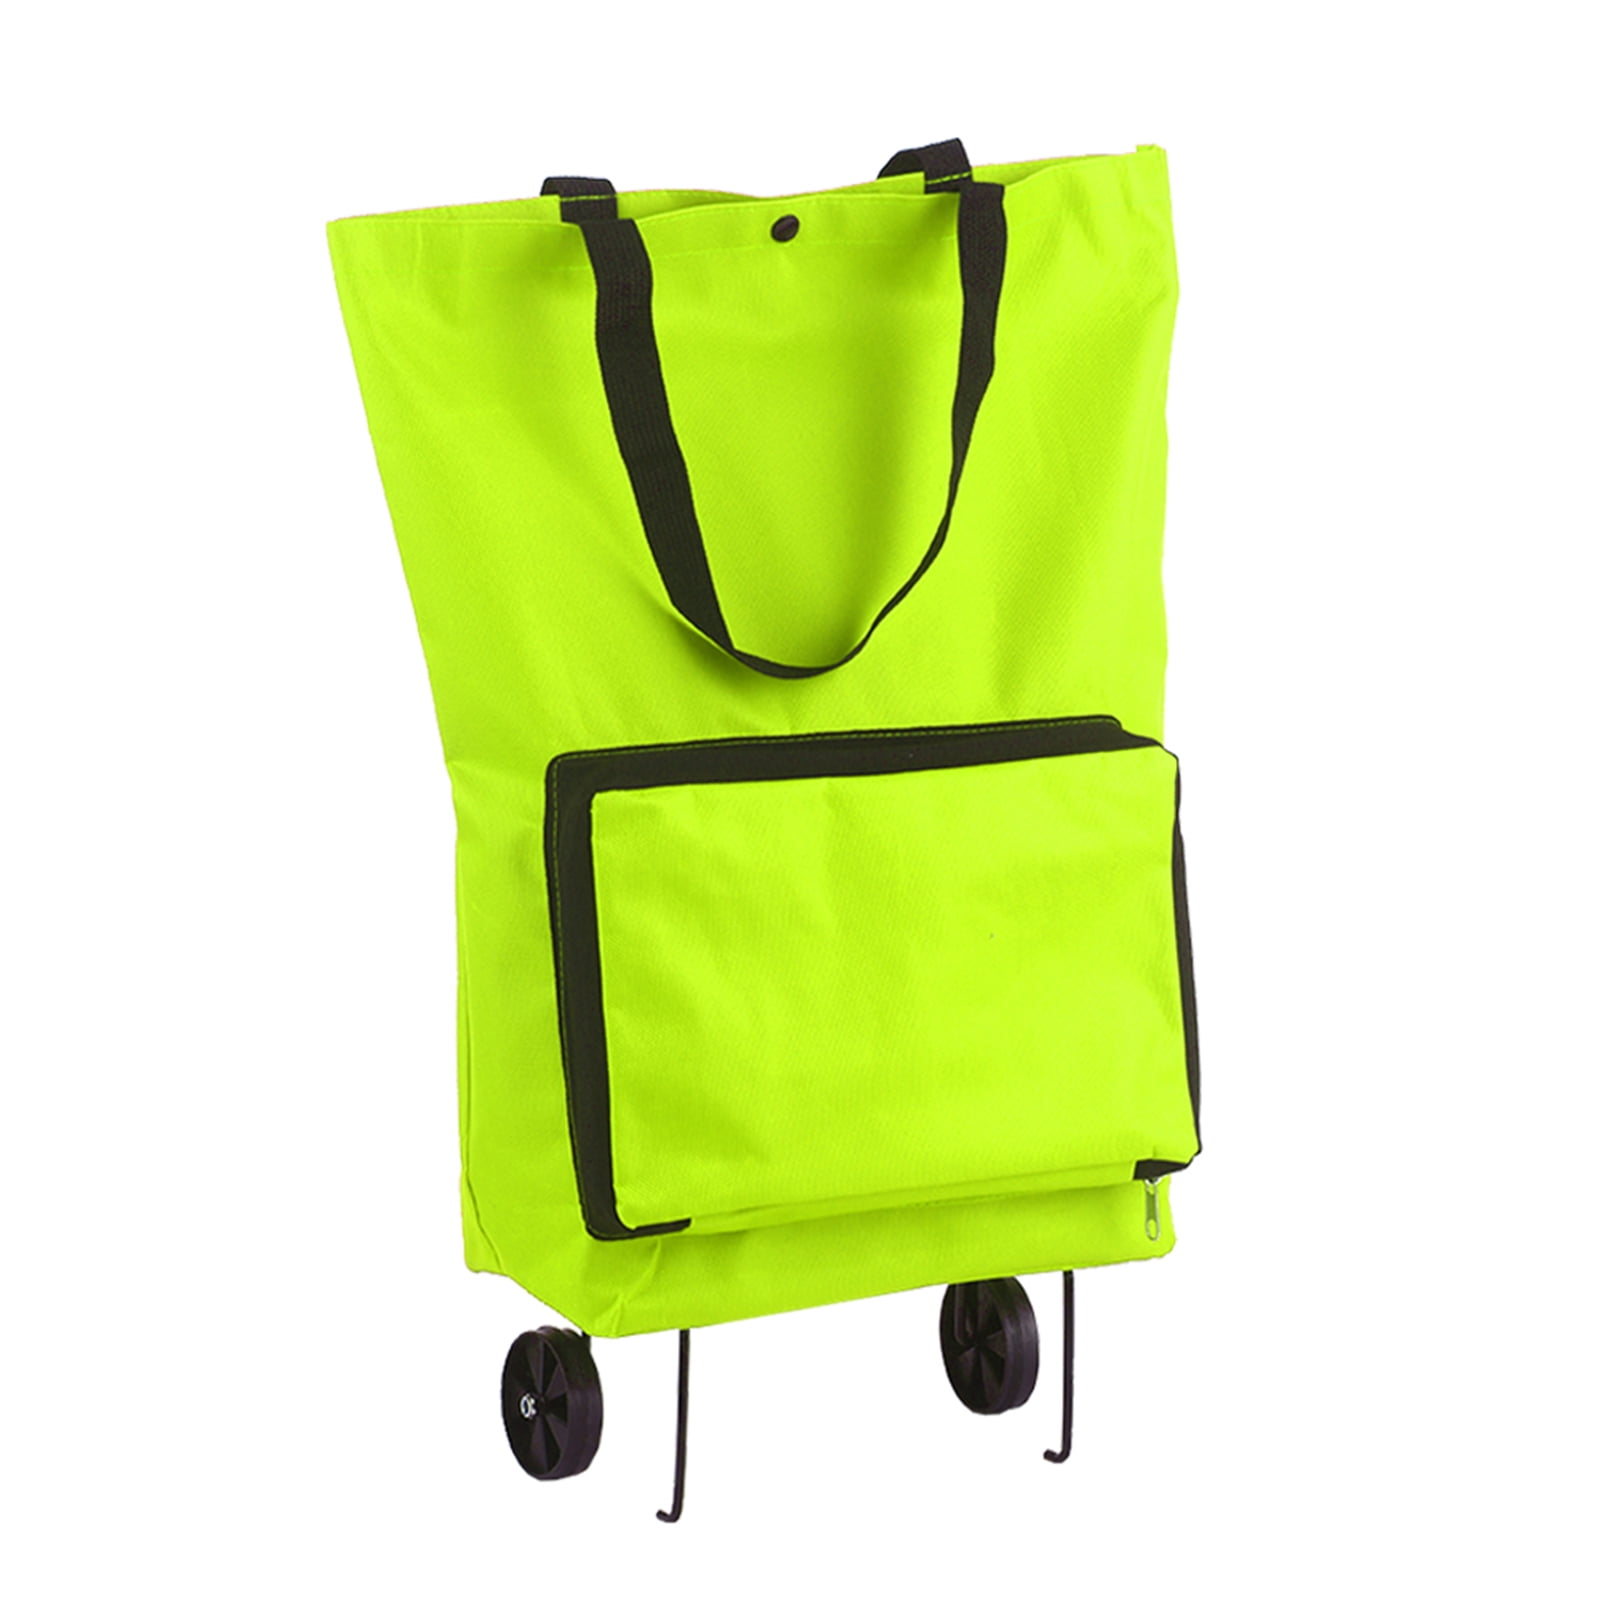 Details about   Storage Eco Trolley Cart Bag Foldable  Shopping Tote Bags Reusable Grocery 